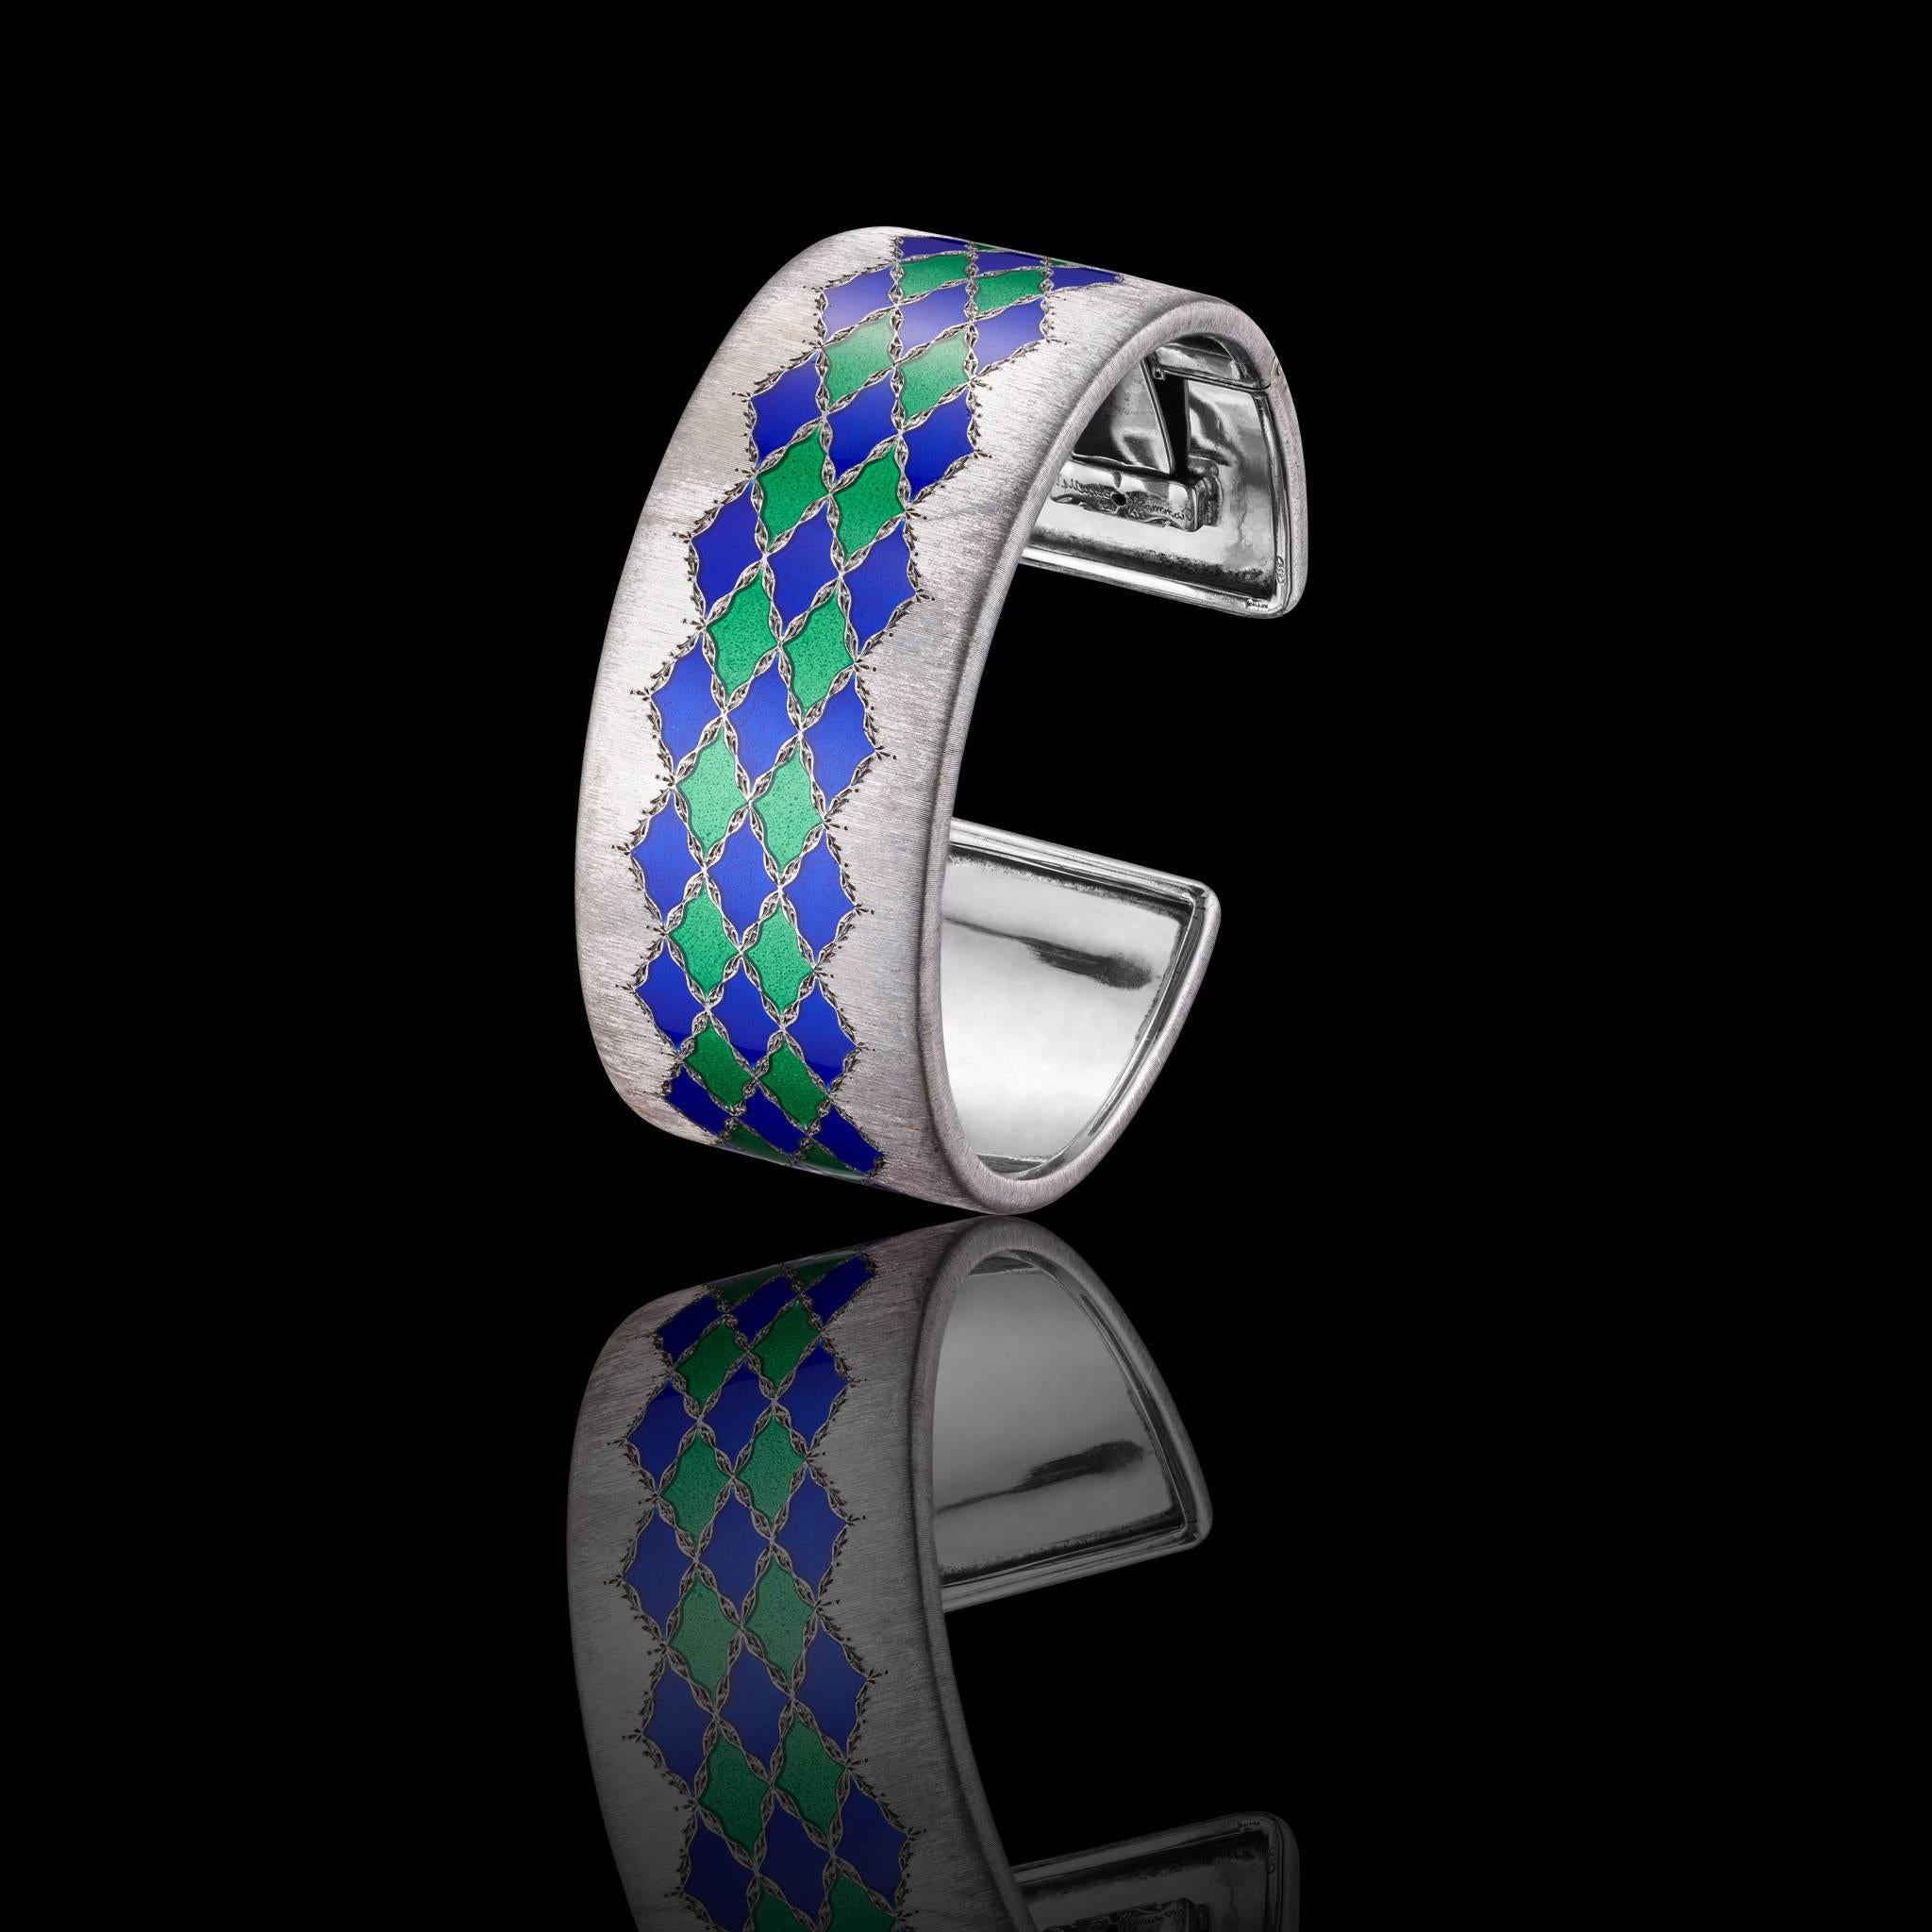 Gianmaria Buccellati Bangle of textured silver decoreted with blue and green lozenge-shaped enamel motifs.
Size/Dimensions:5,9 diameter/2,7cm at the widest point.
SiGNATURE:Gianmaria Buccellati ,Italy.
Marks:925.
